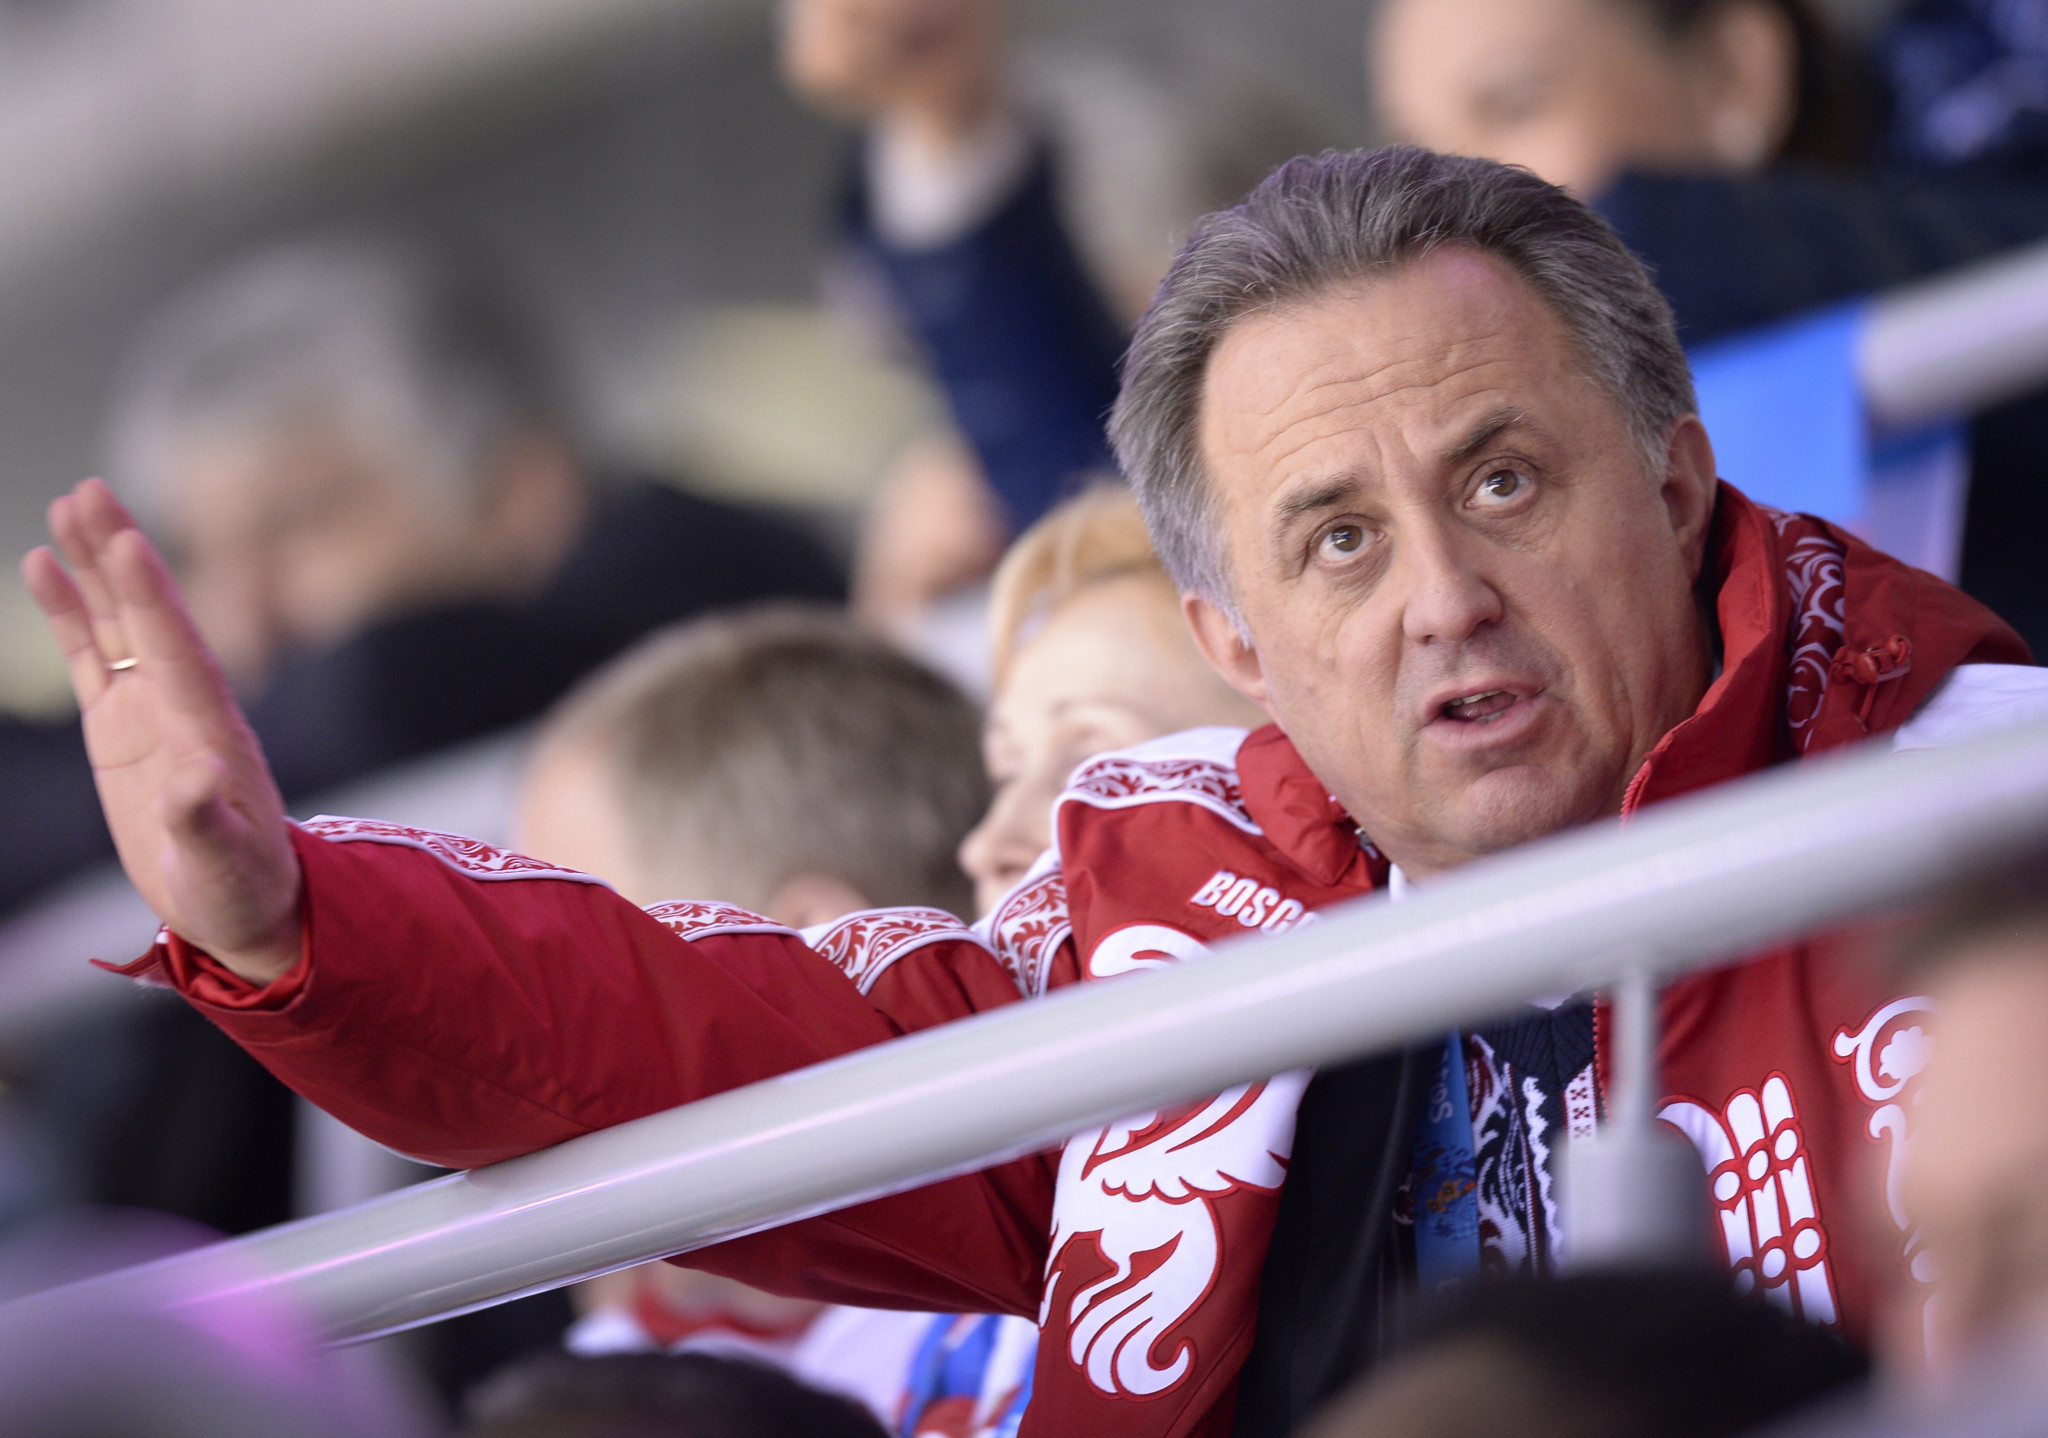 Vitaly Mutko has claimed Russia will only pay a $15 million fine to the IOC if they receive guarantee no further disciplinary action will be taken ©Getty Images